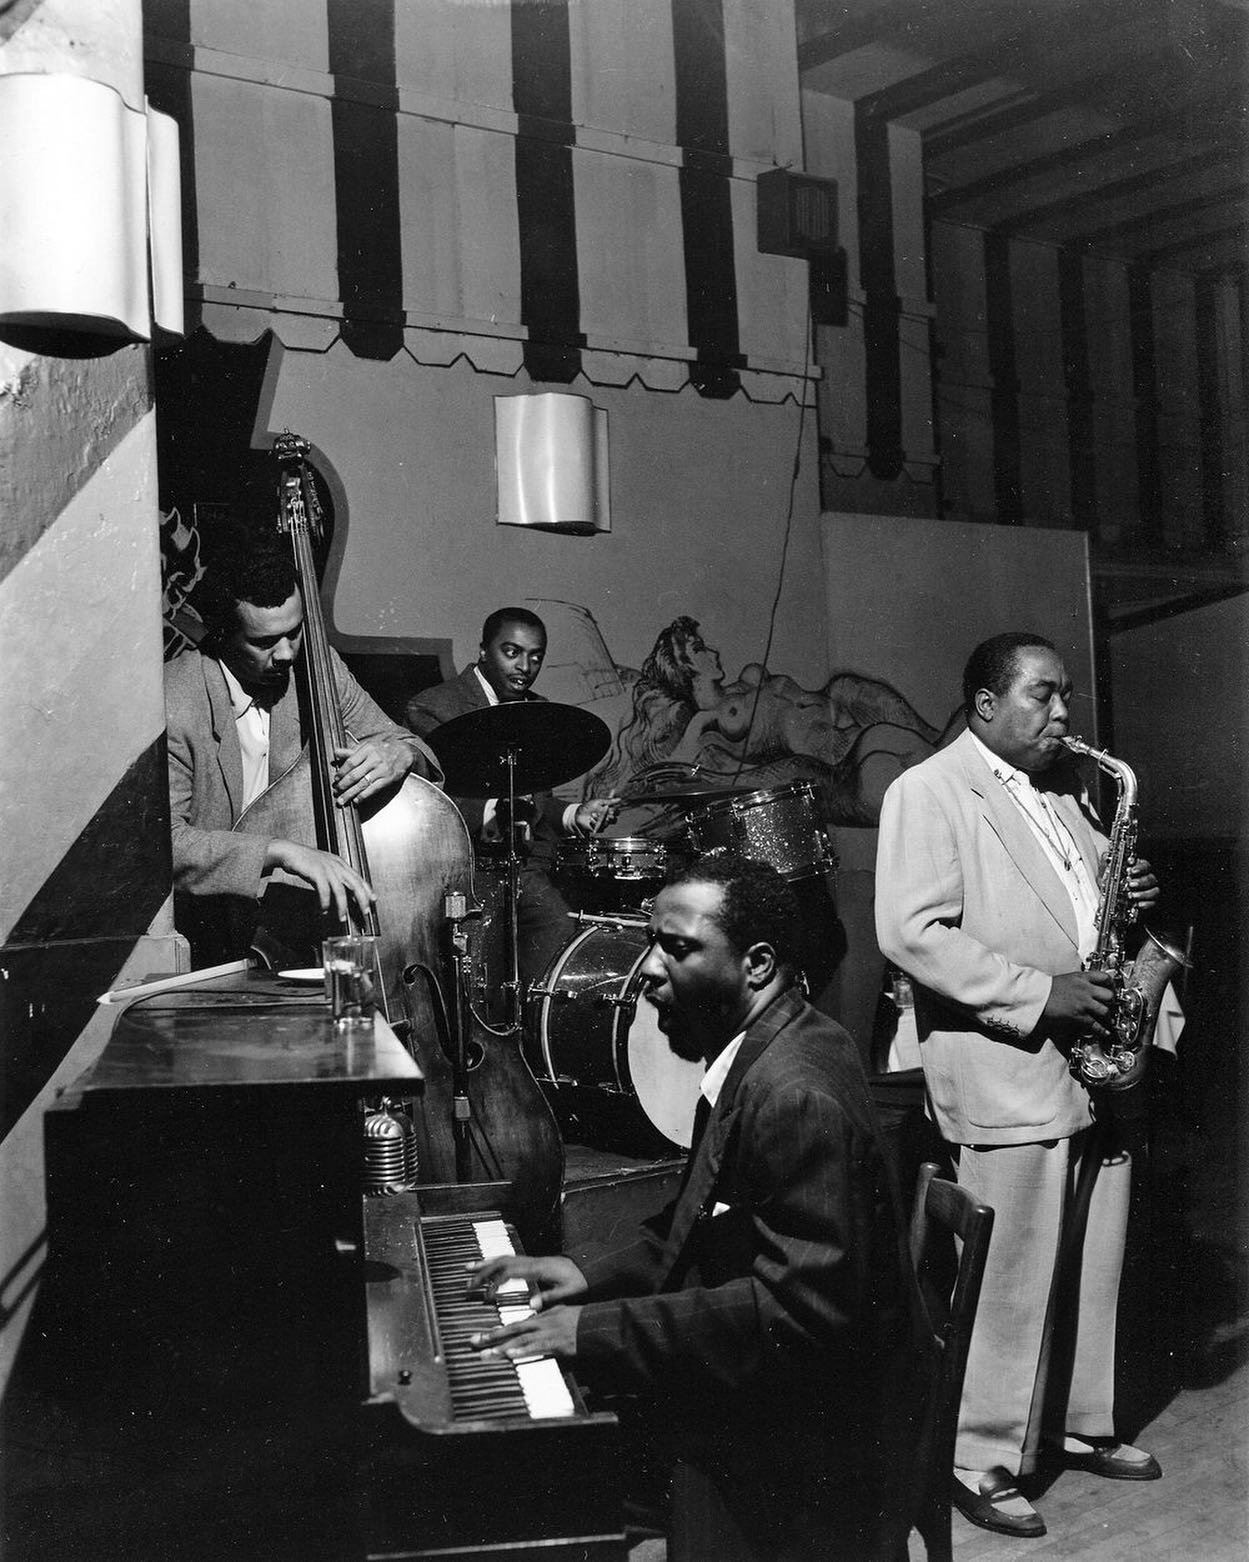 70 years ago... 

Sunday, September 13, 1953
The Open Door on West 3rd Street, NYC

Charlie Parker, 33
Thelonious Monk, 35
Charles Mingus, 31
Roy Haynes, 28

Photograph by Bob Parent